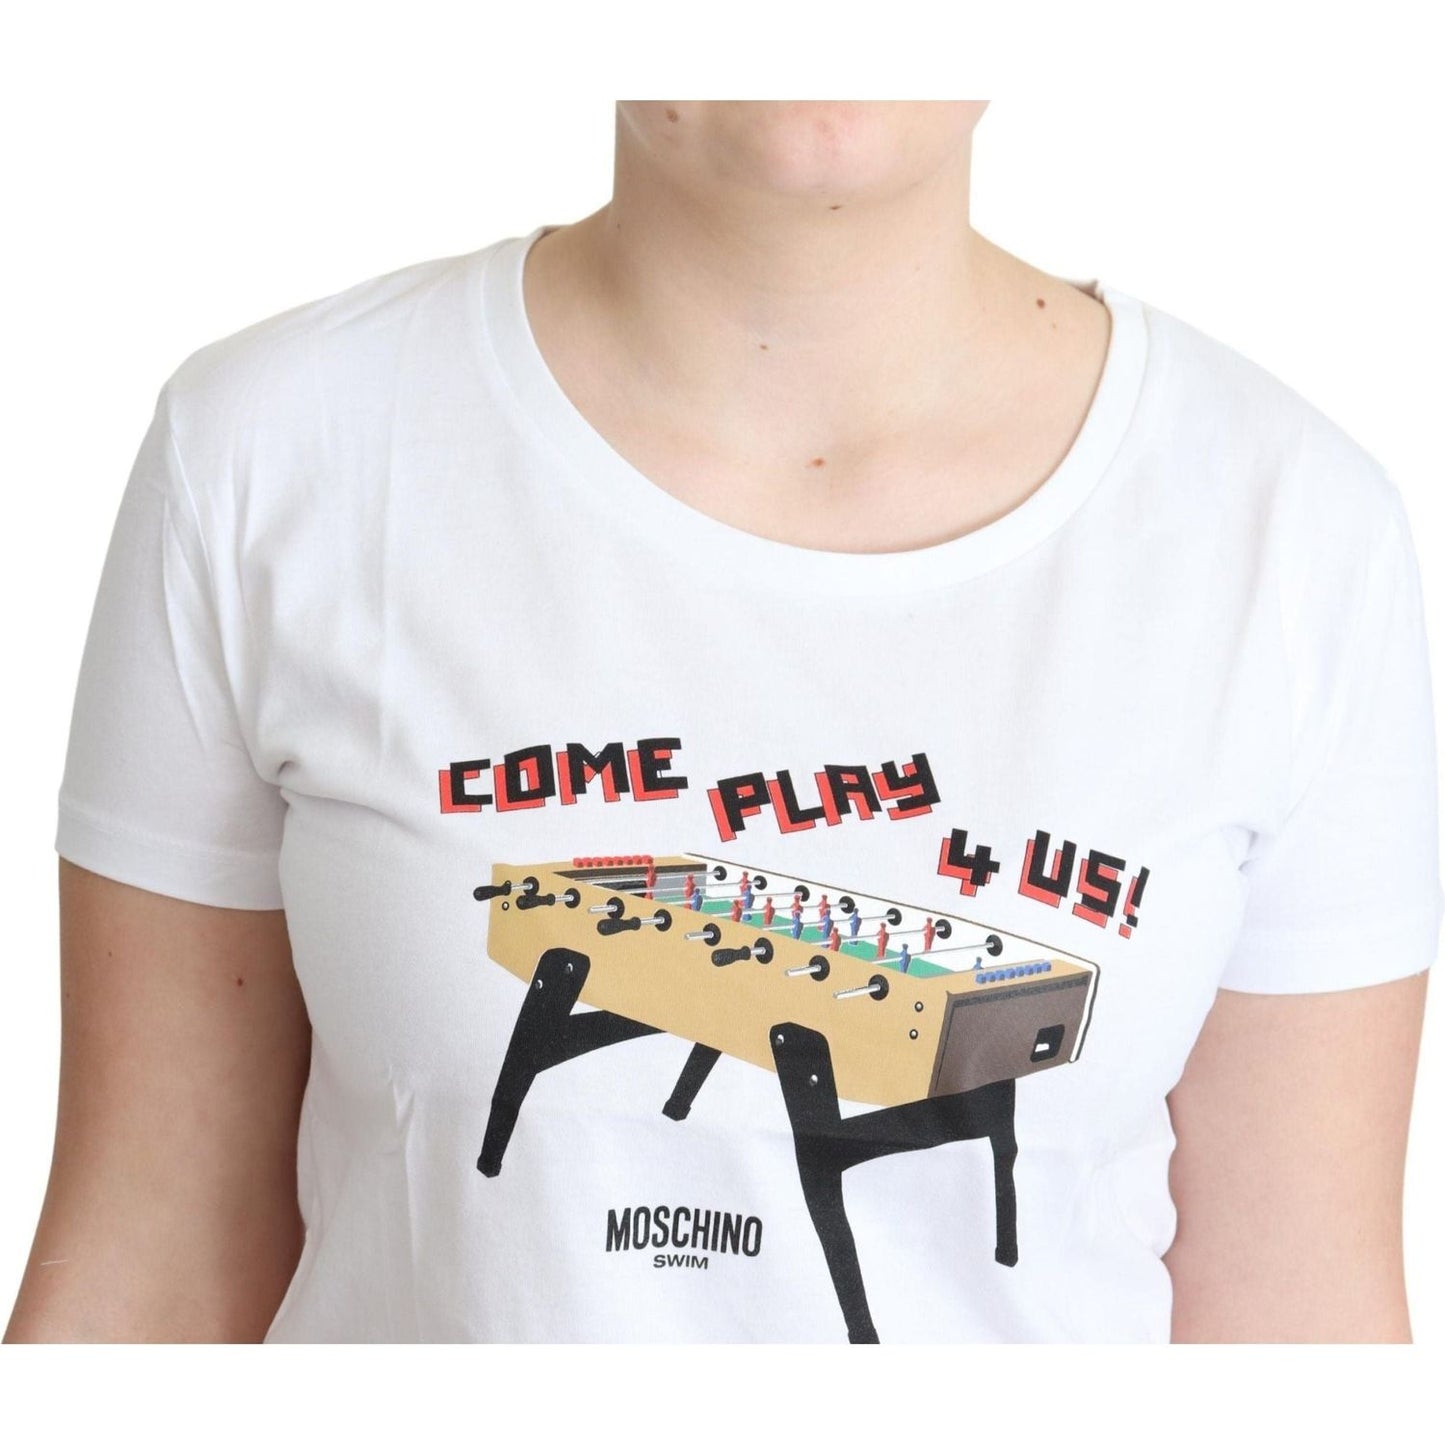 Moschino Chic Cotton Round Neck Tee with Playful Print white-cotton-come-play-4-us-print-tops-t-shirt